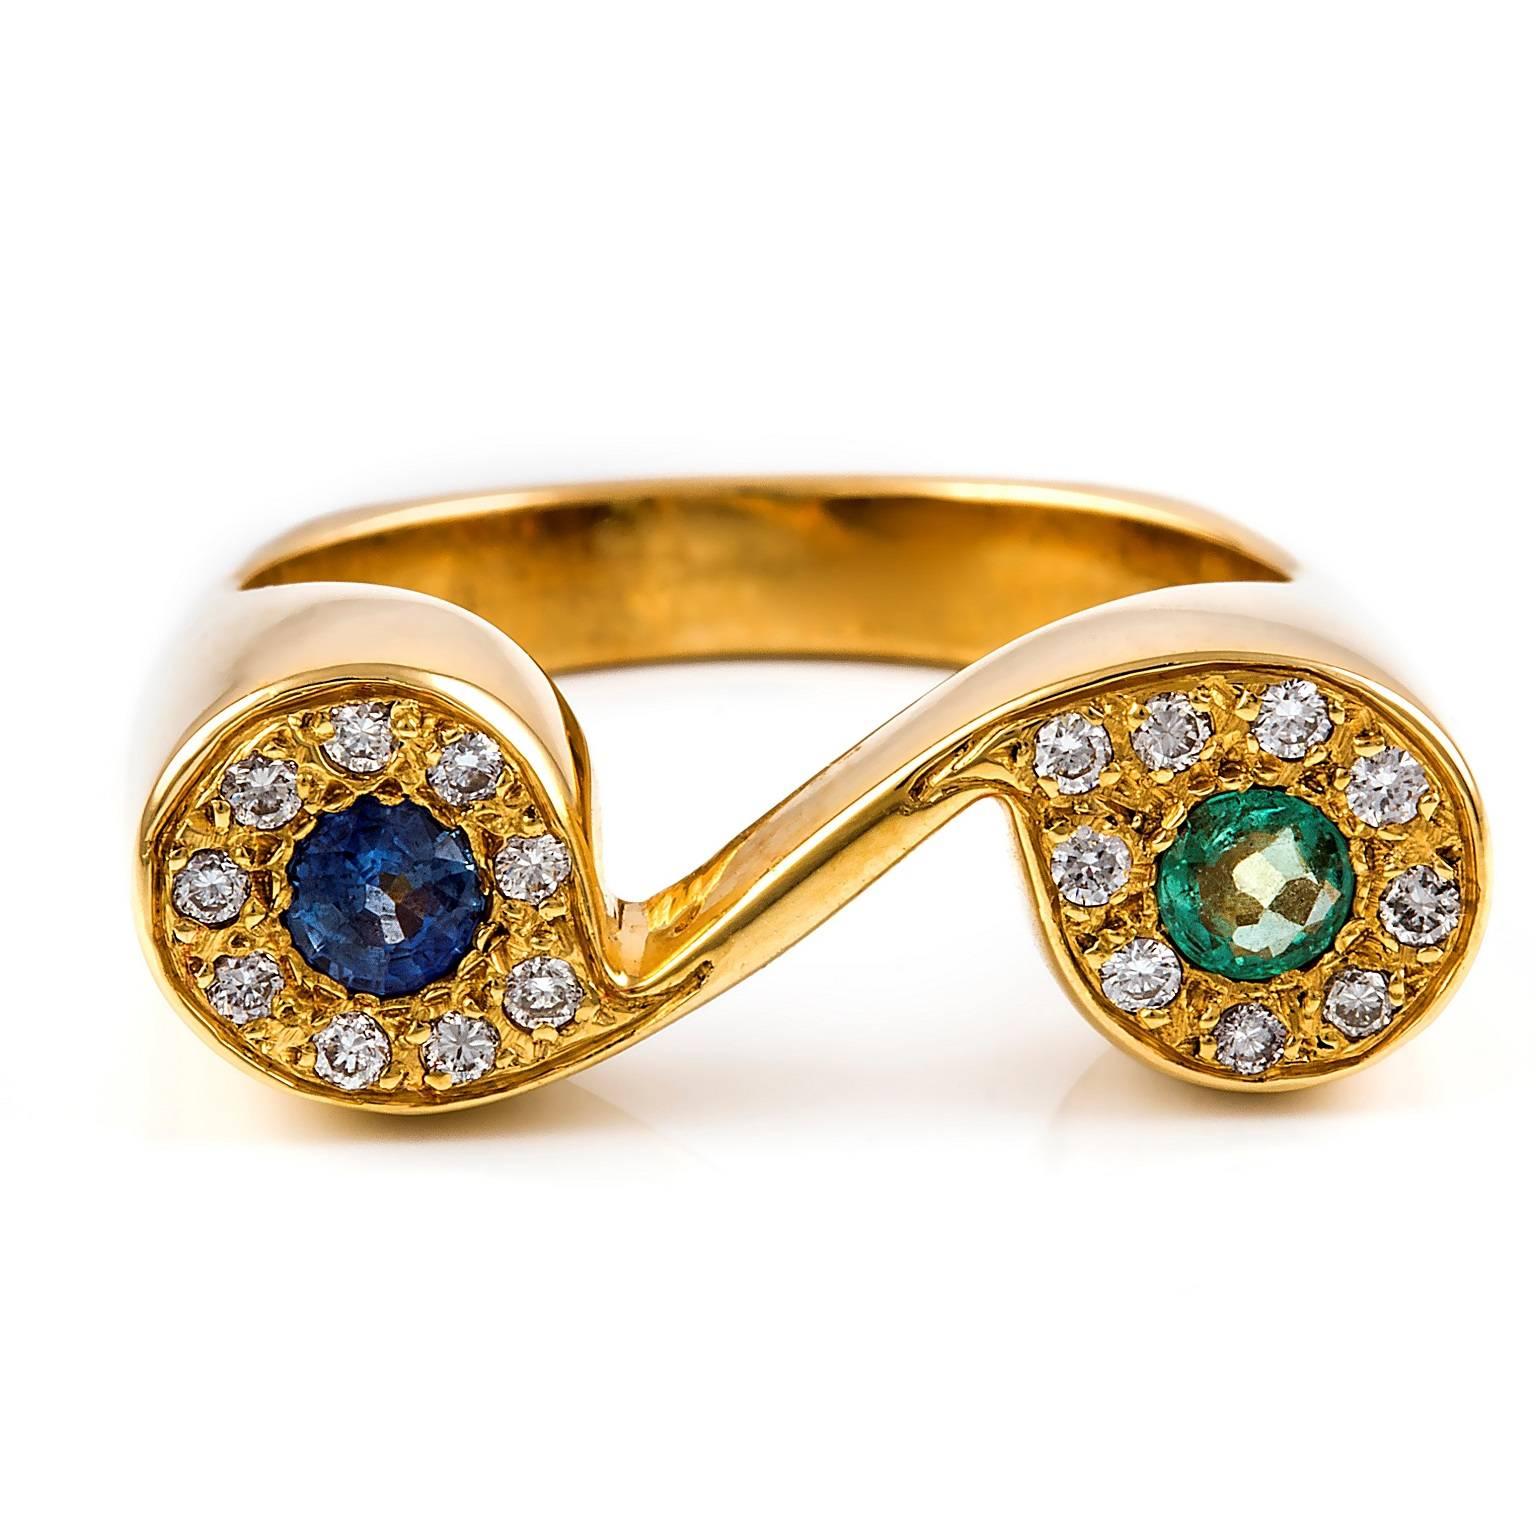 Two lovely stones, an emerald and a sapphire, are featured at the centres of the diamond settings that form this unique scroll style ring.

Round faceted emerald: light green colour, lively stone, 3.30mm

Round faceted sapphire: medium blue colour,